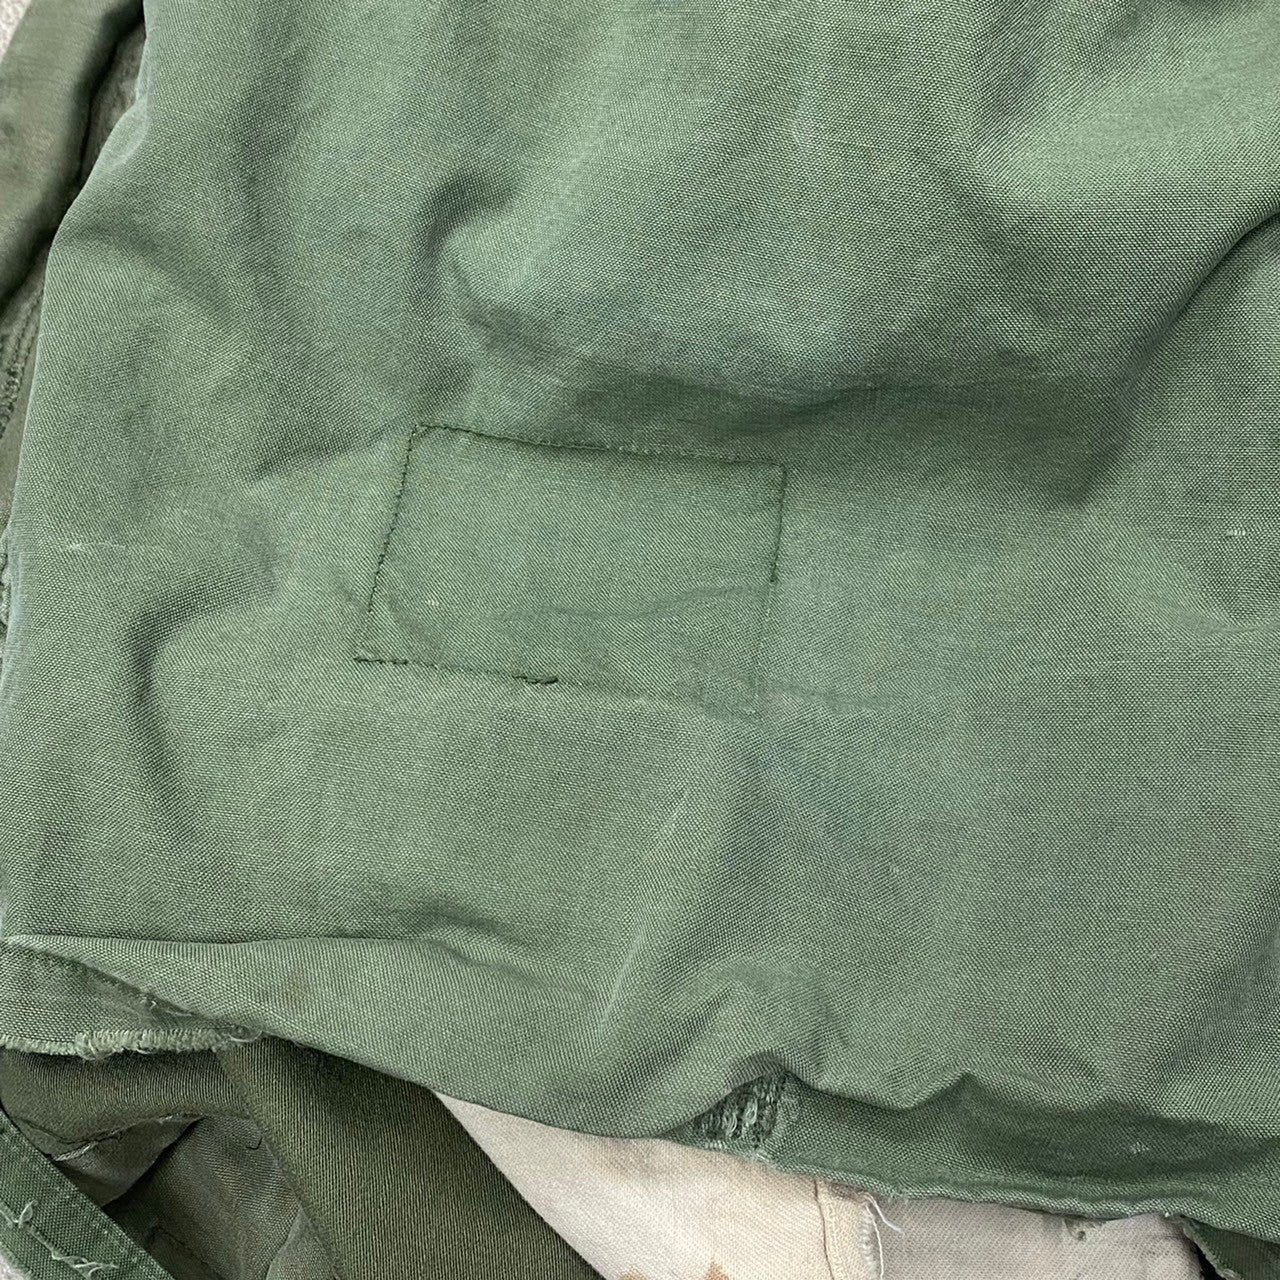 [ ONLY ONE ! ] US ARMED FORCES M-65 Field COAT / U.S.MILITARY